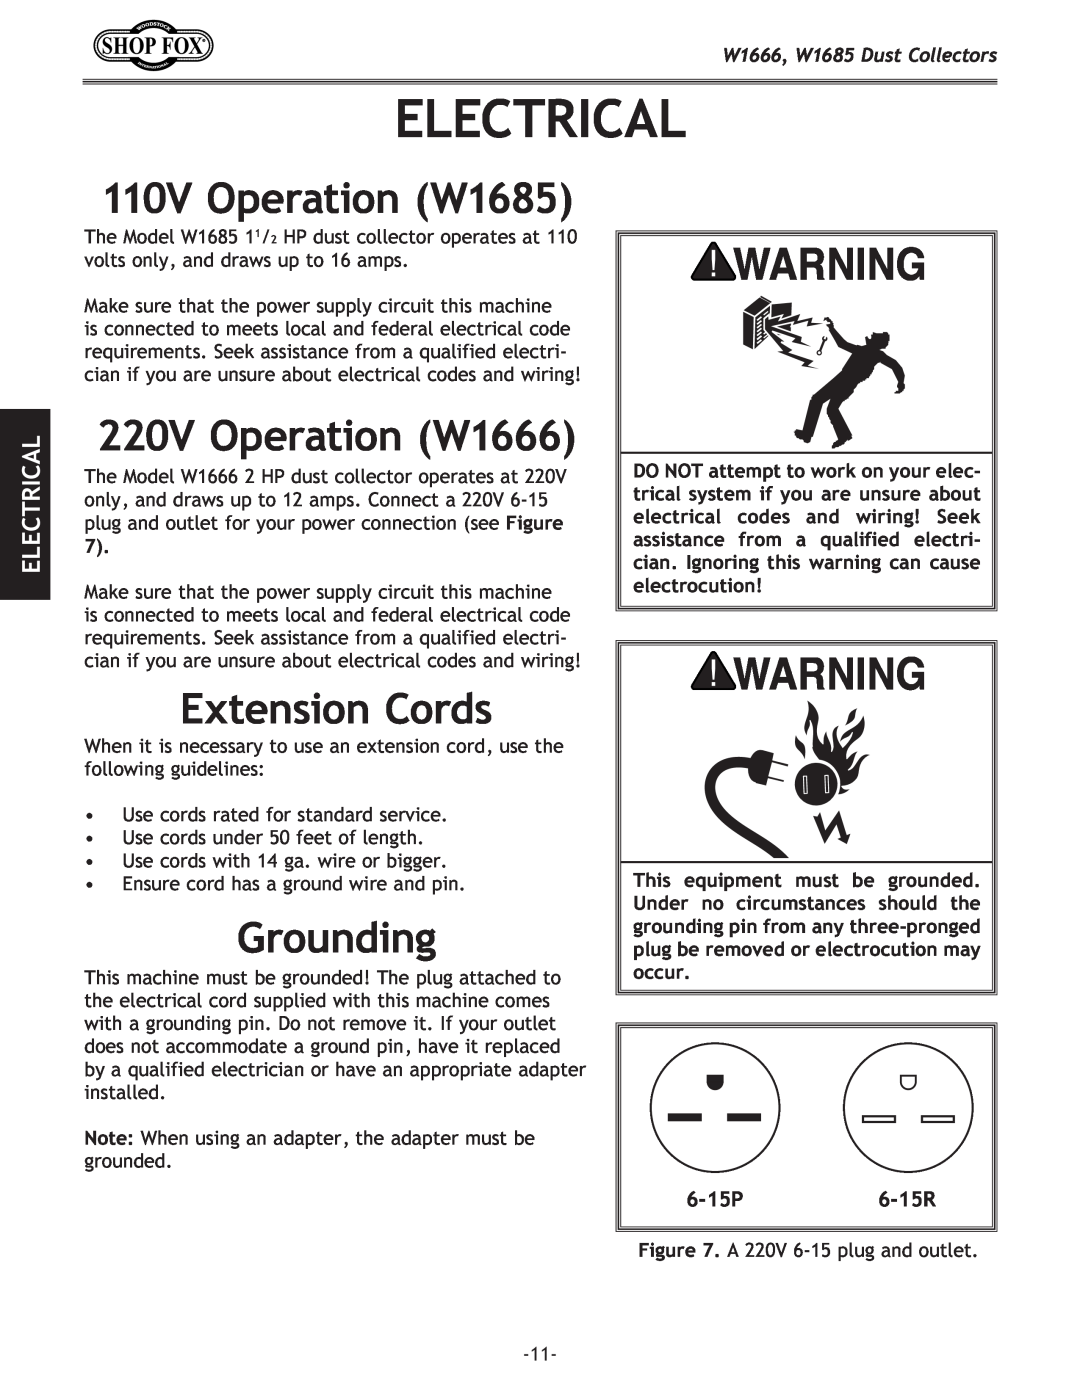 Woodstock Electrical, 110V Operation W1685, 220V Operation W1666, Extension Cords, Grounding, 6-15P6-15R 